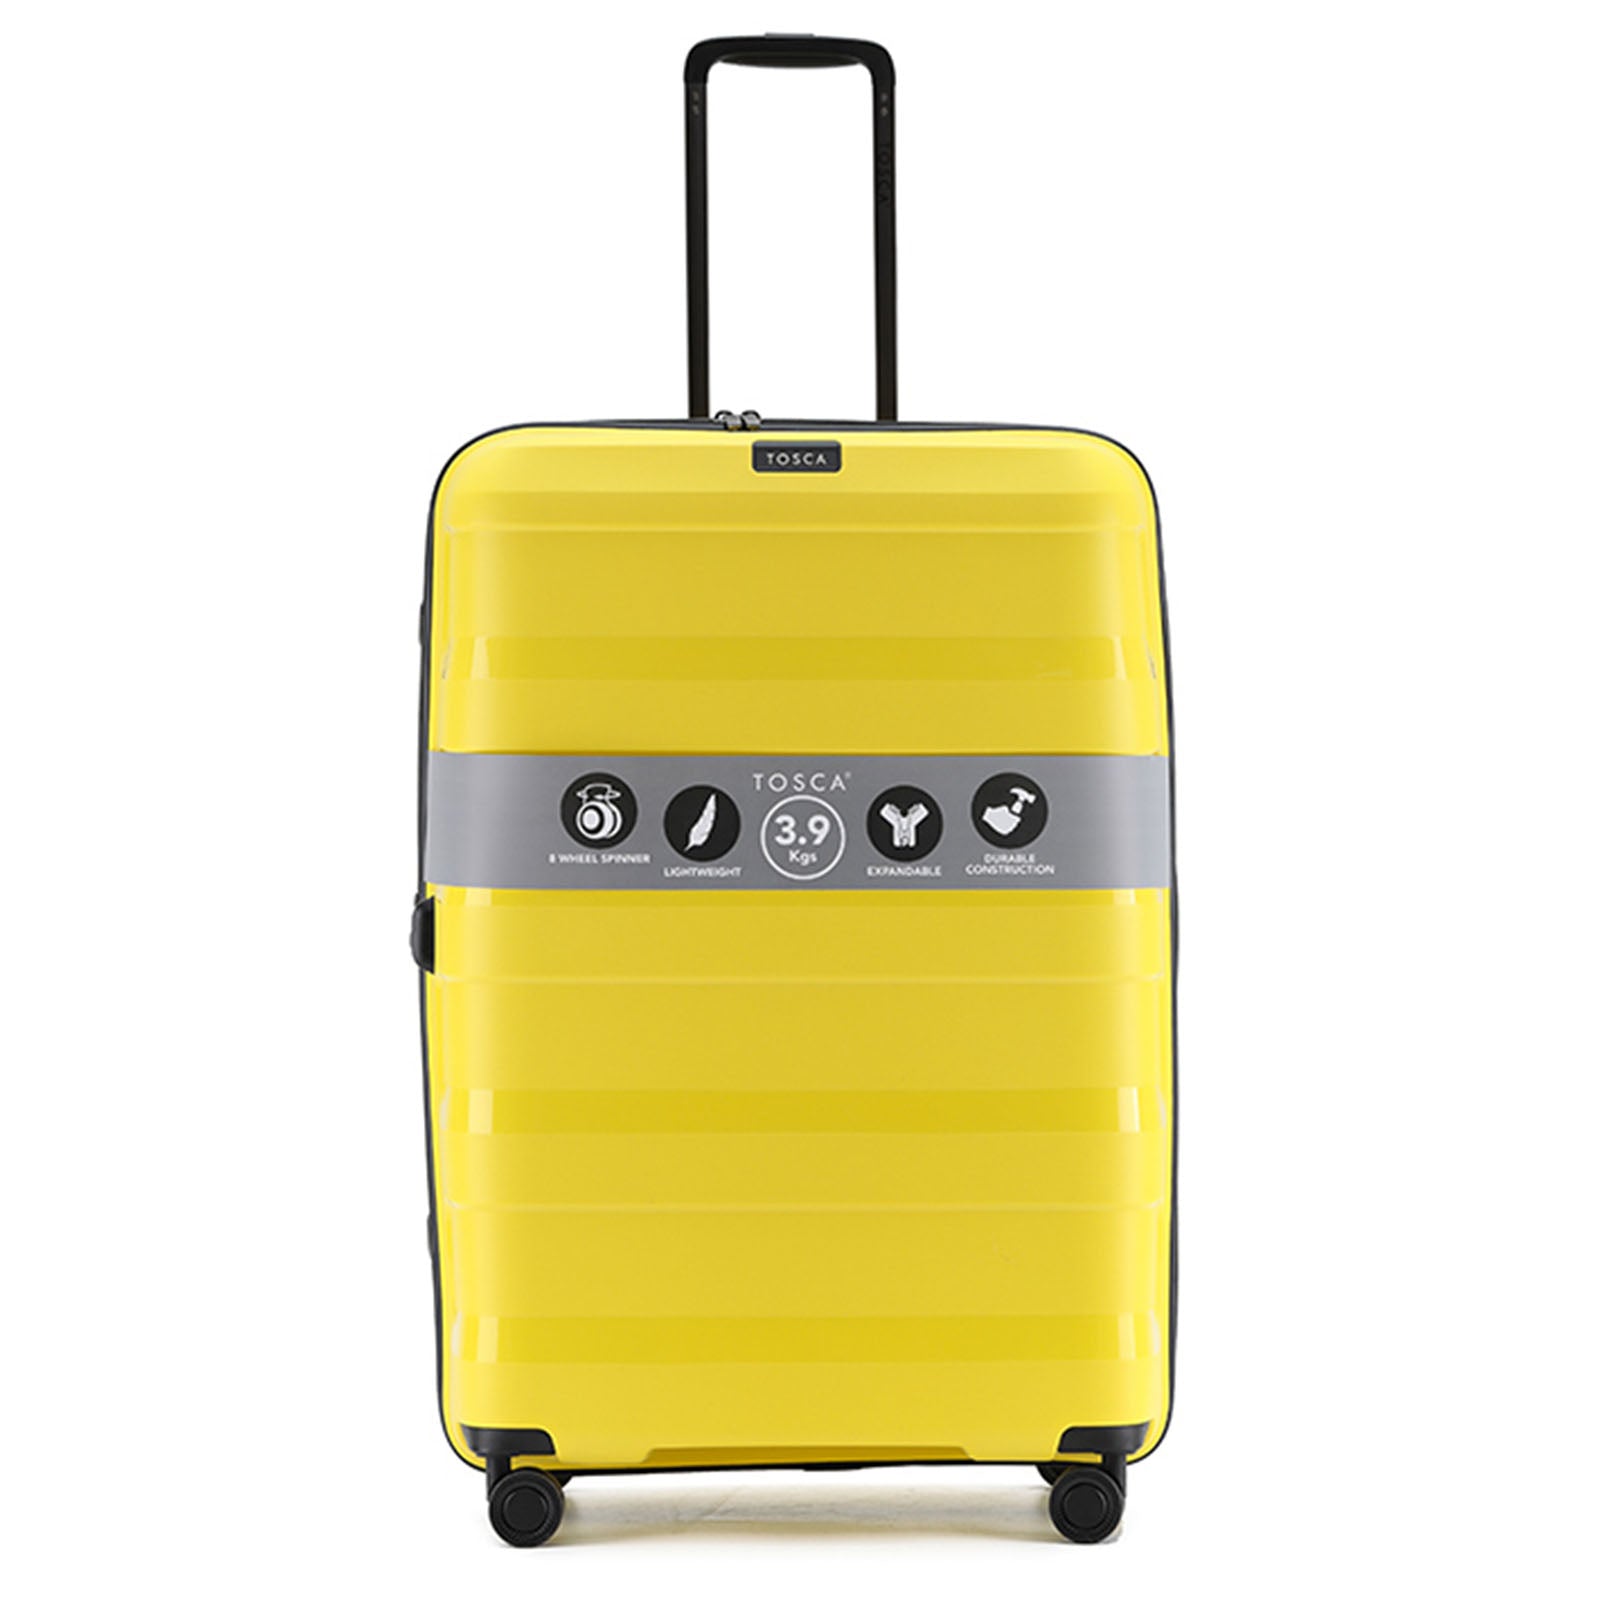 Tosca-Comet-4-Wheel-78cm-Large-Suitcase-Yellow-Front